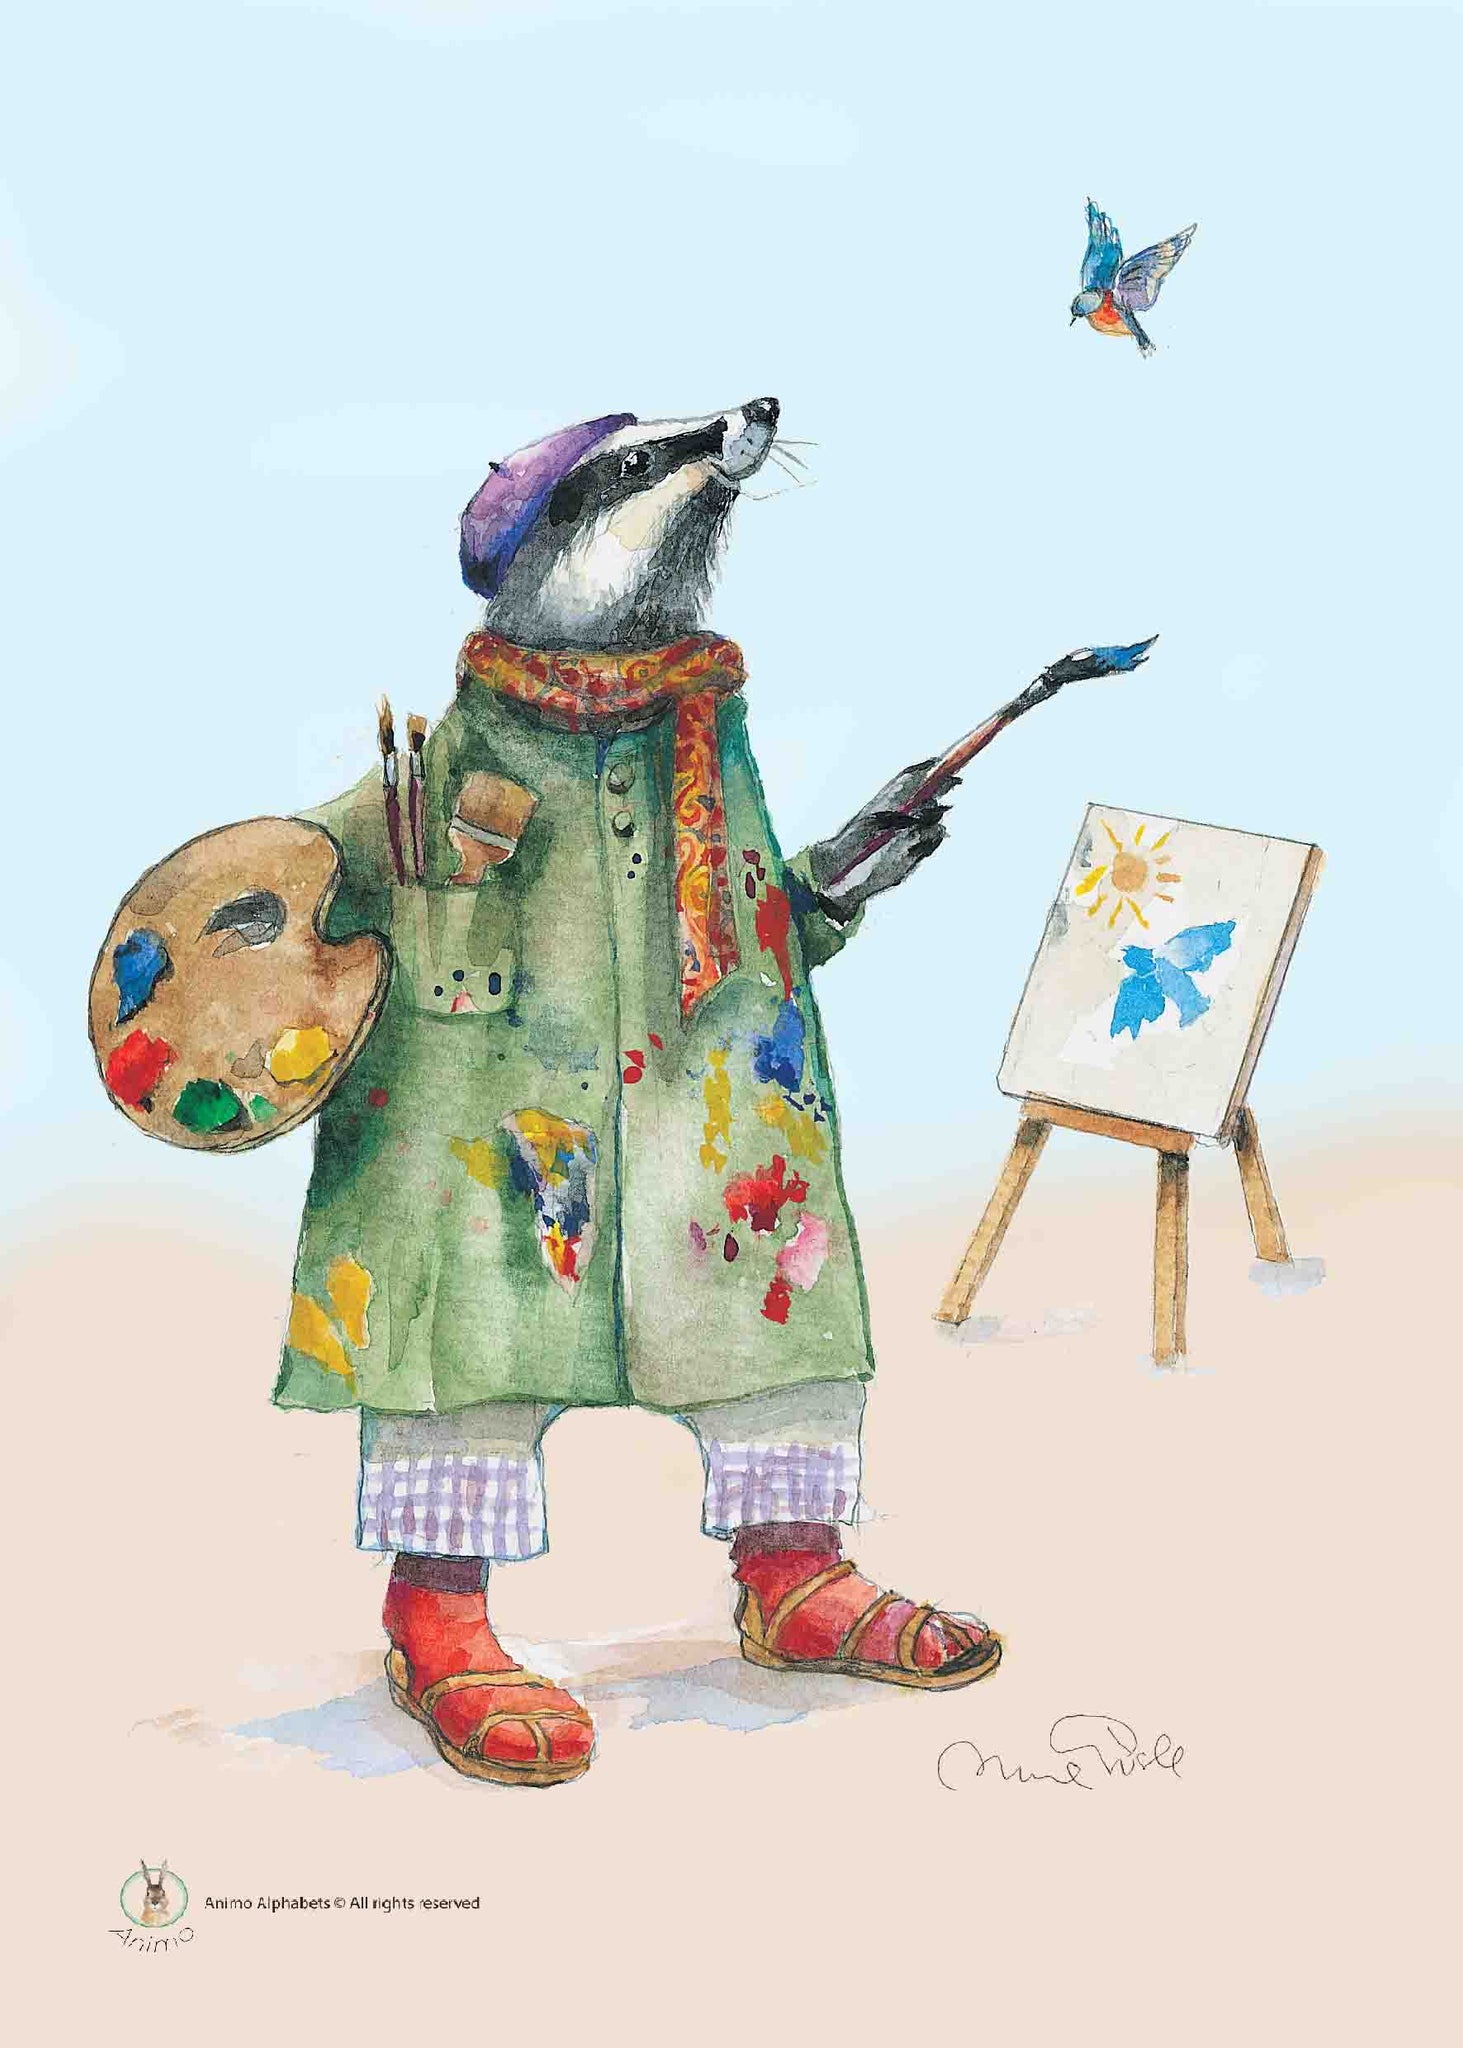 The Artistic Badger